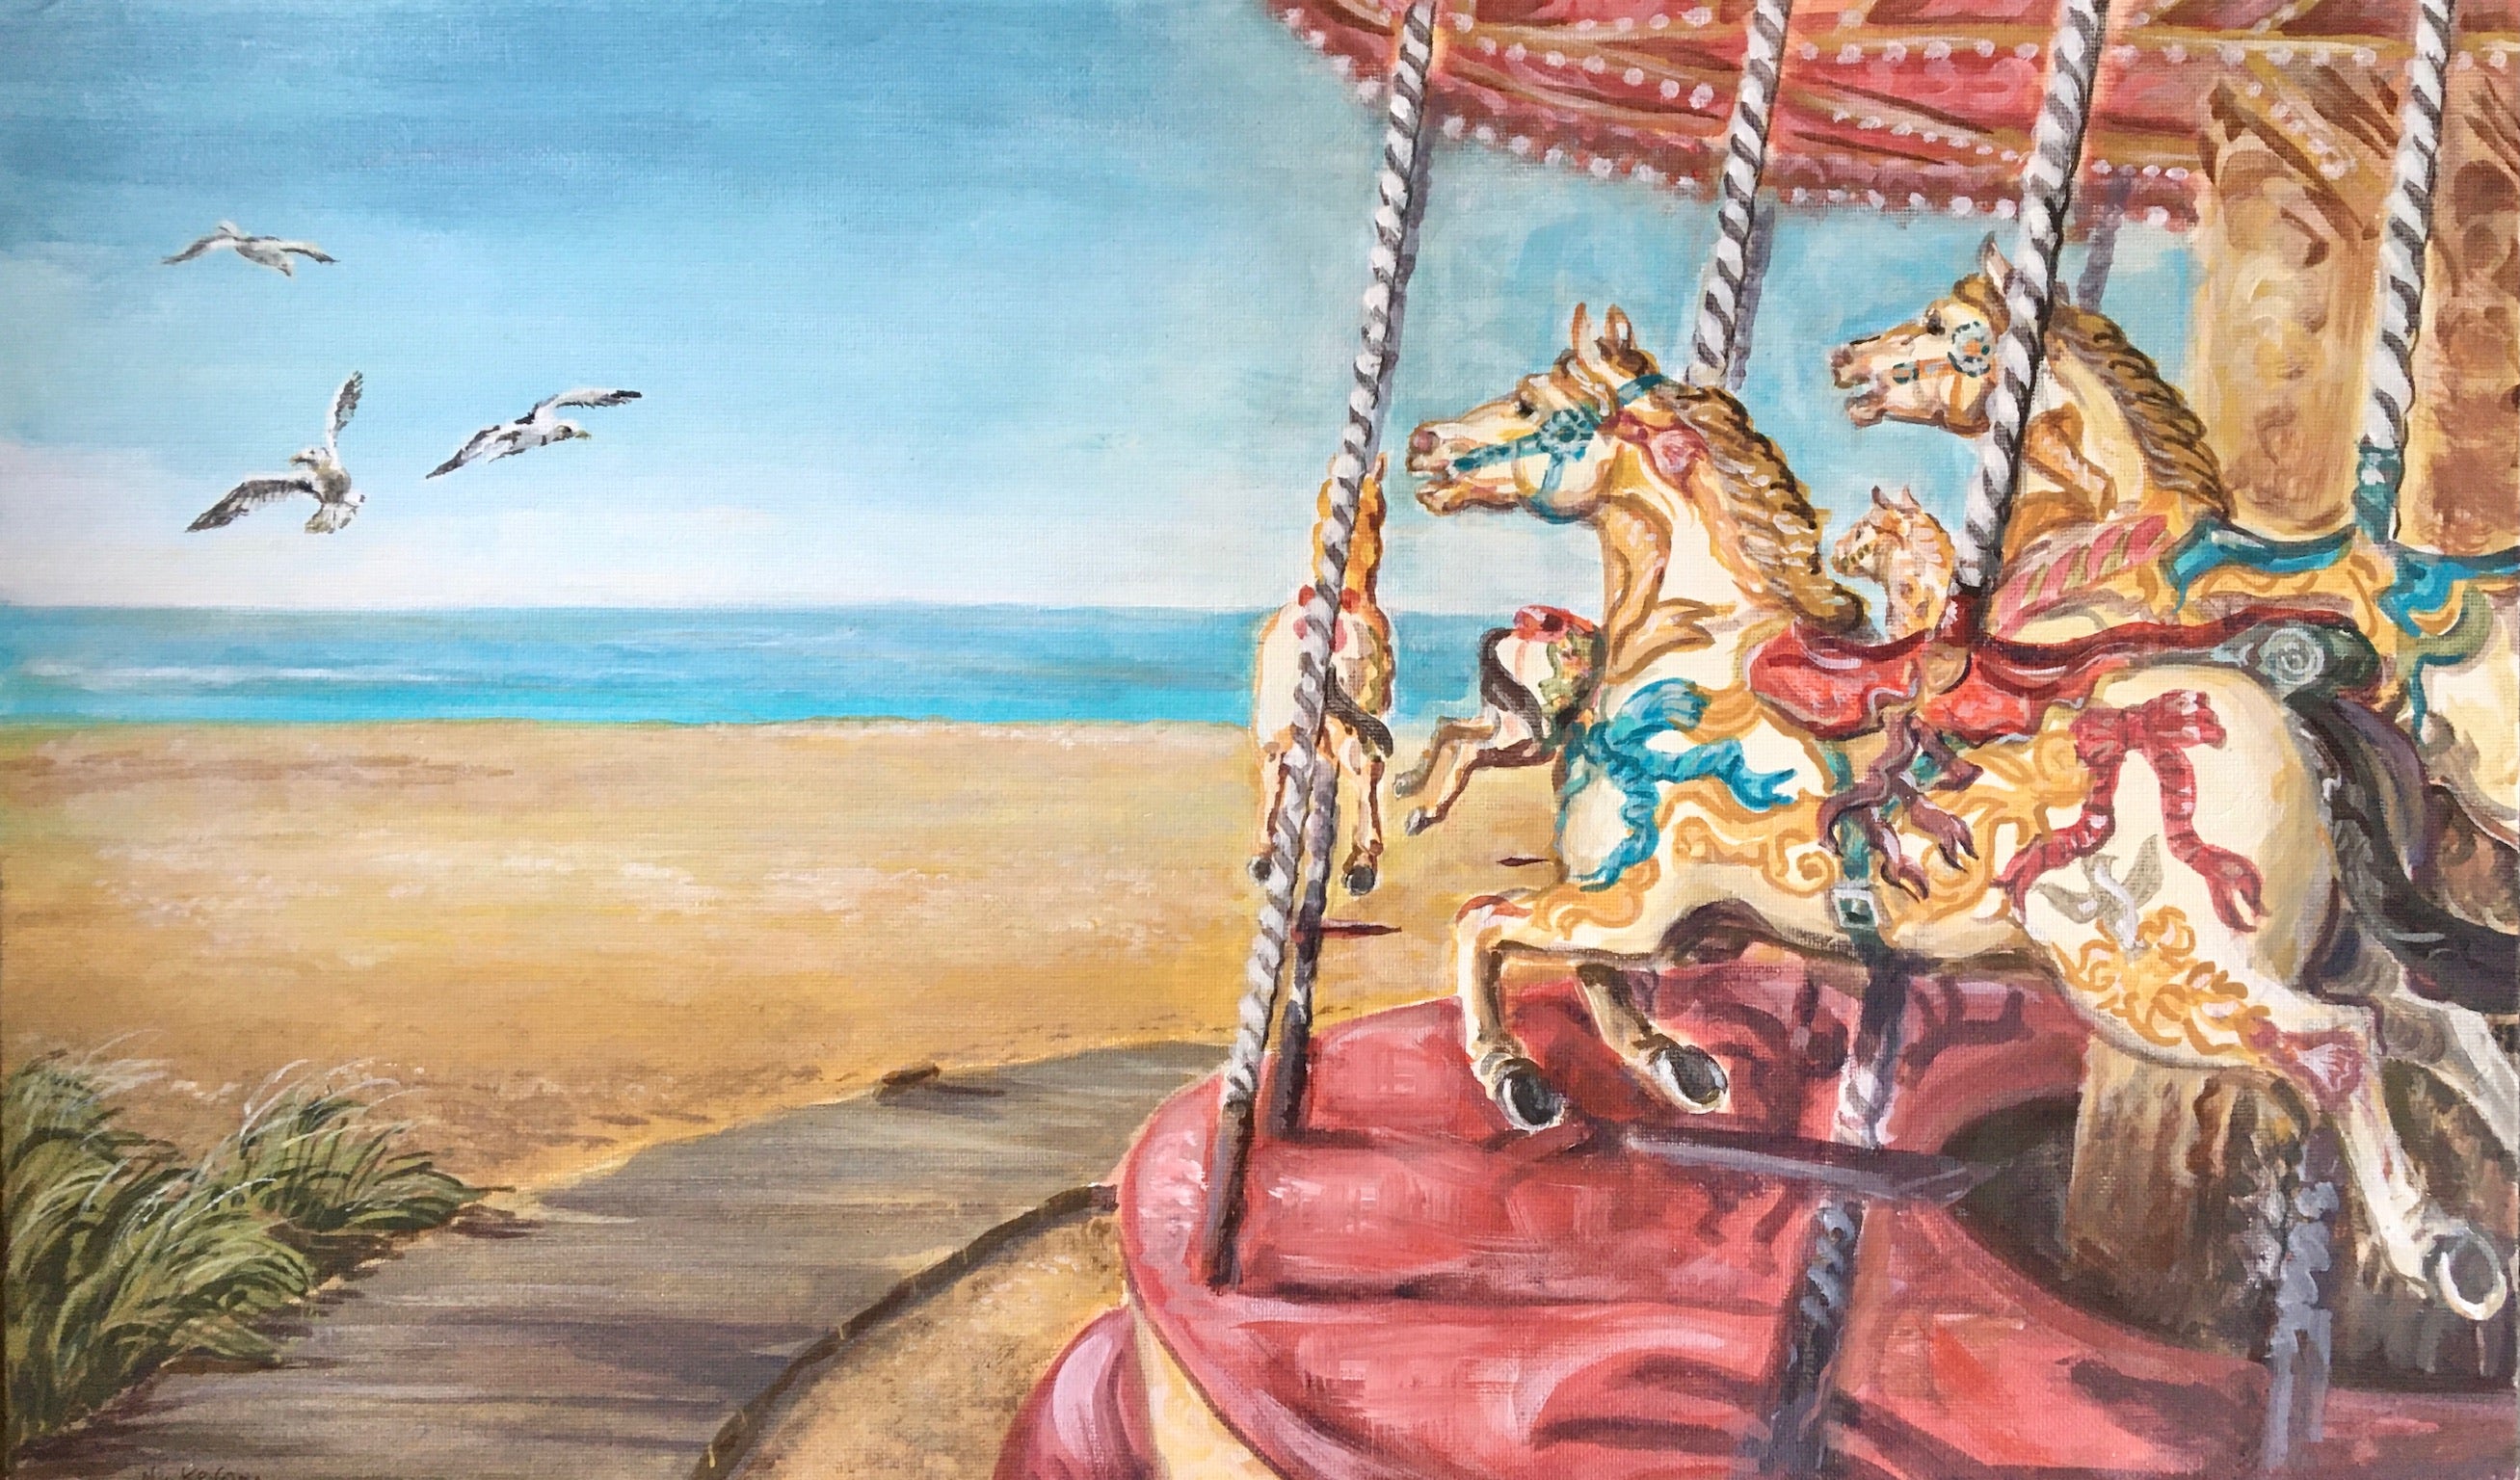 This painting depicts a traditional fairground carousel. The main horse in my painting of a merry go round, is looking rather wistfully at the freedom of the seagulls in the sky above the inviting beach.